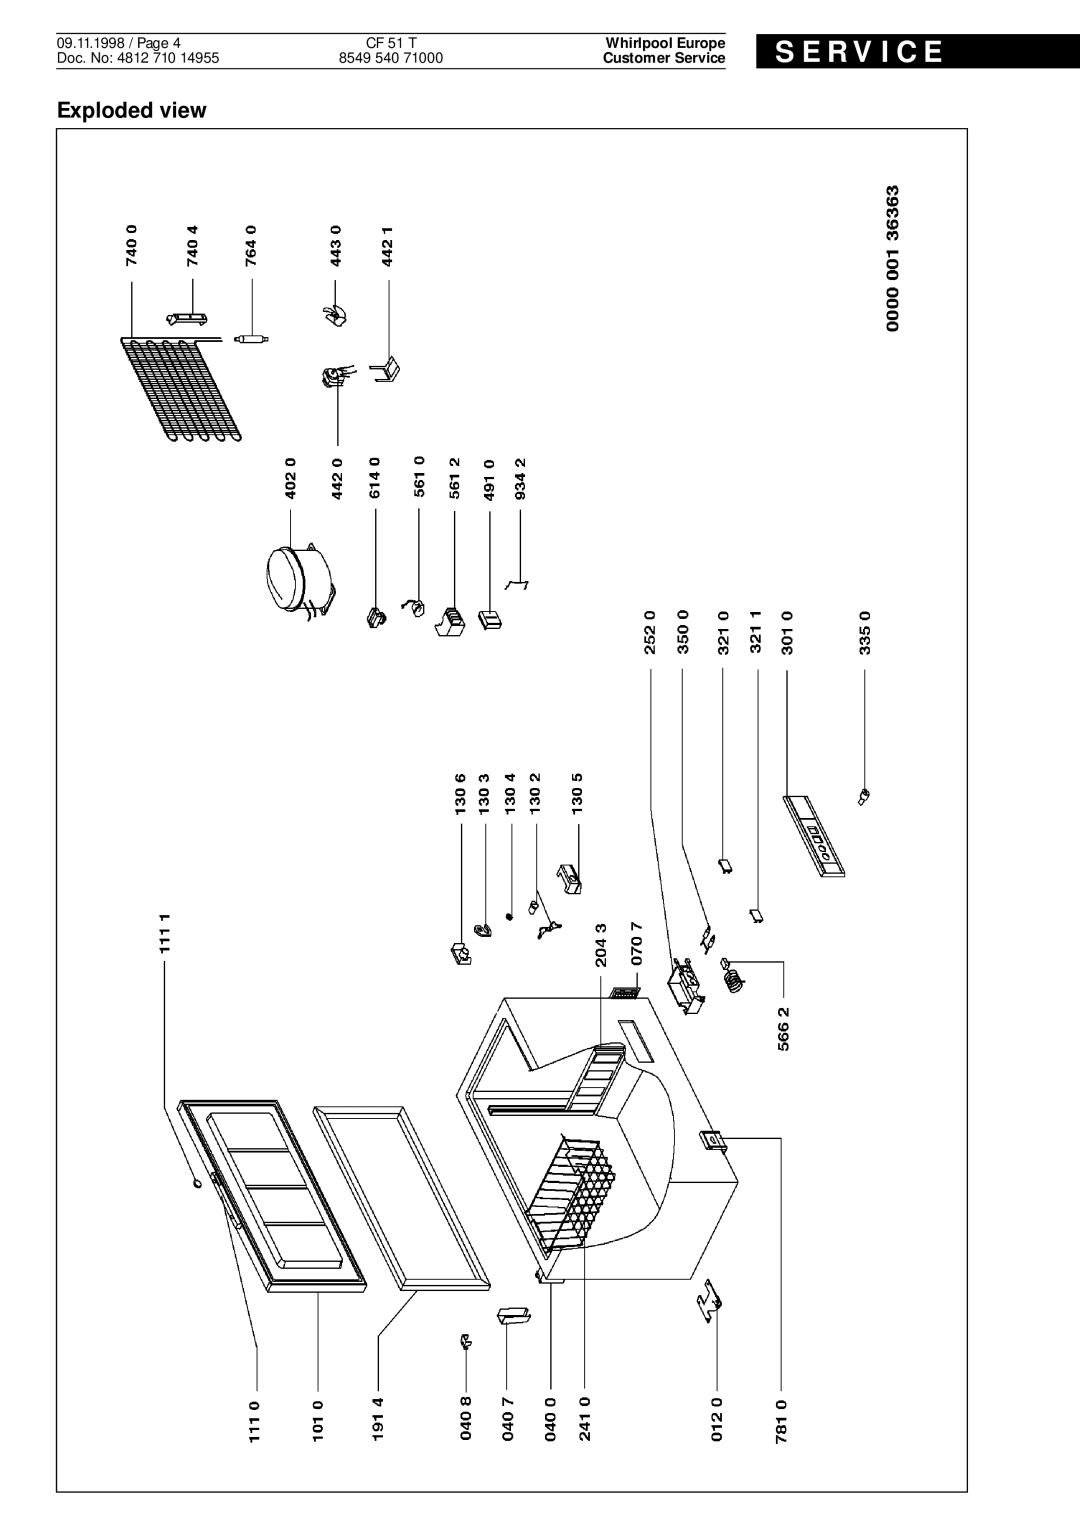 Whirlpool CF 51 T service manual Exploded view, S E R V I C E, Whirlpool Europe, Customer Service 